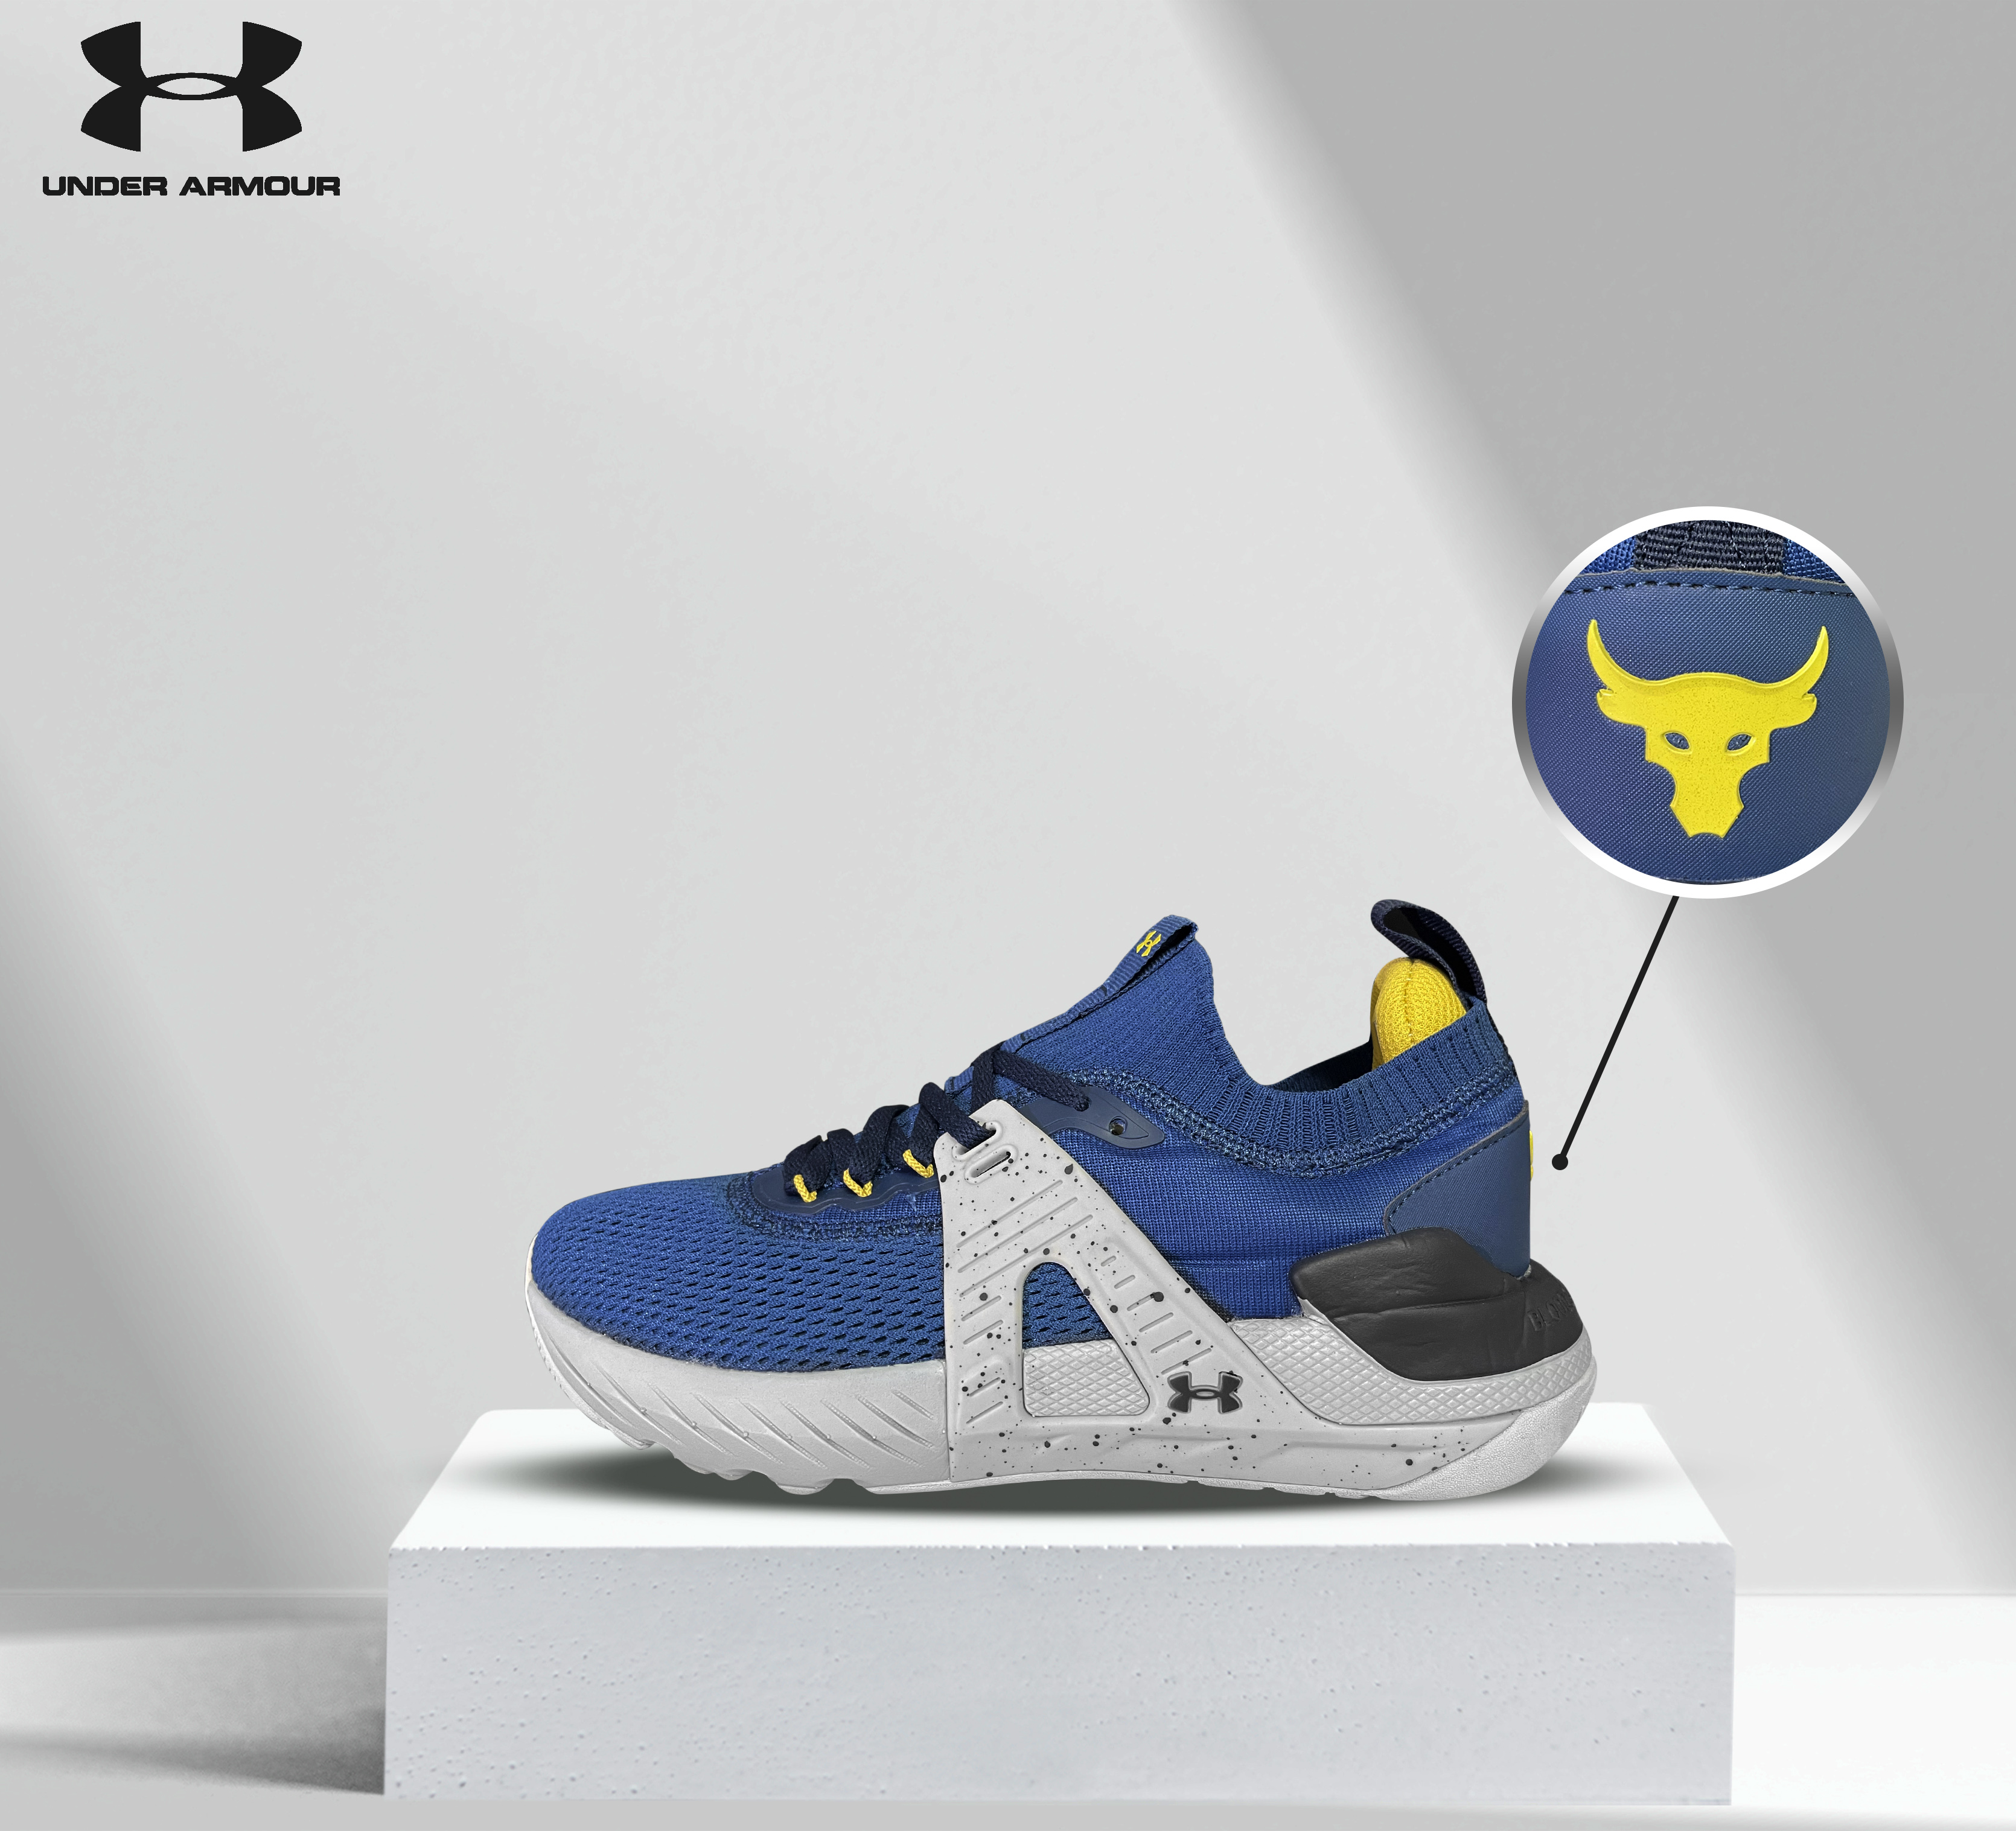 UNDER ARMOUR RUNNING SHOES